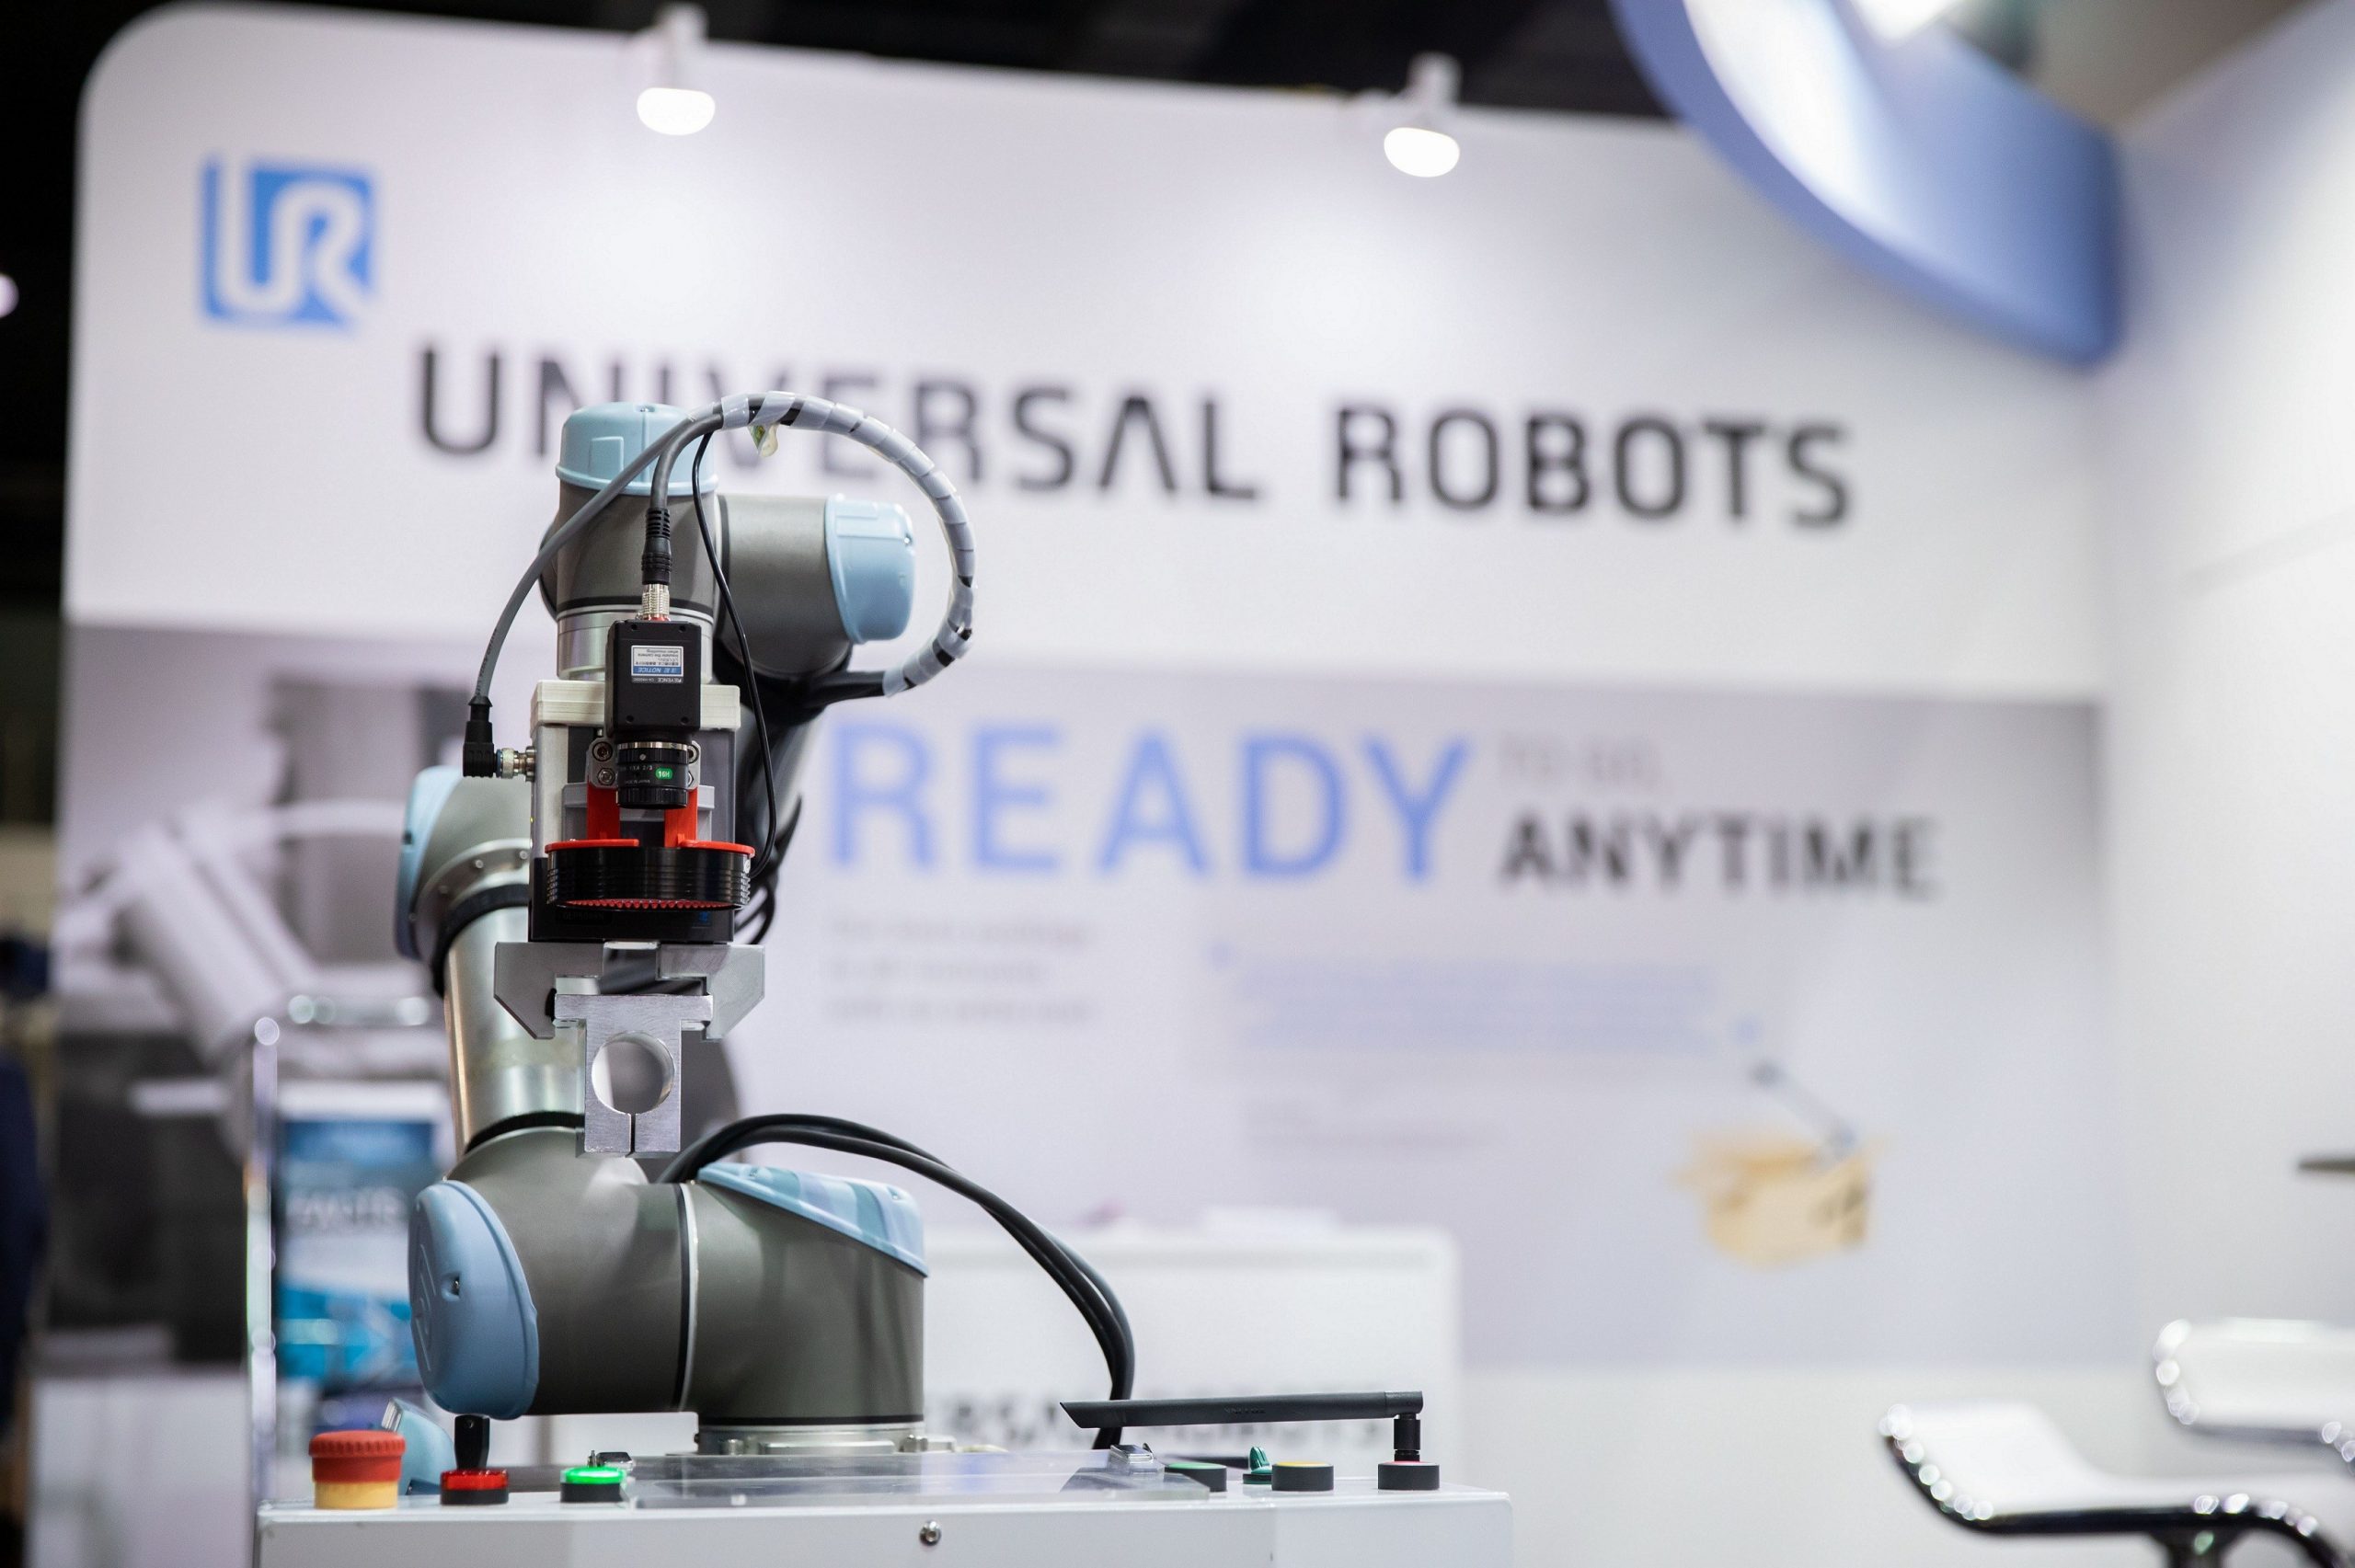 Universal Robots’ urges SMEs to adopt robotic automation